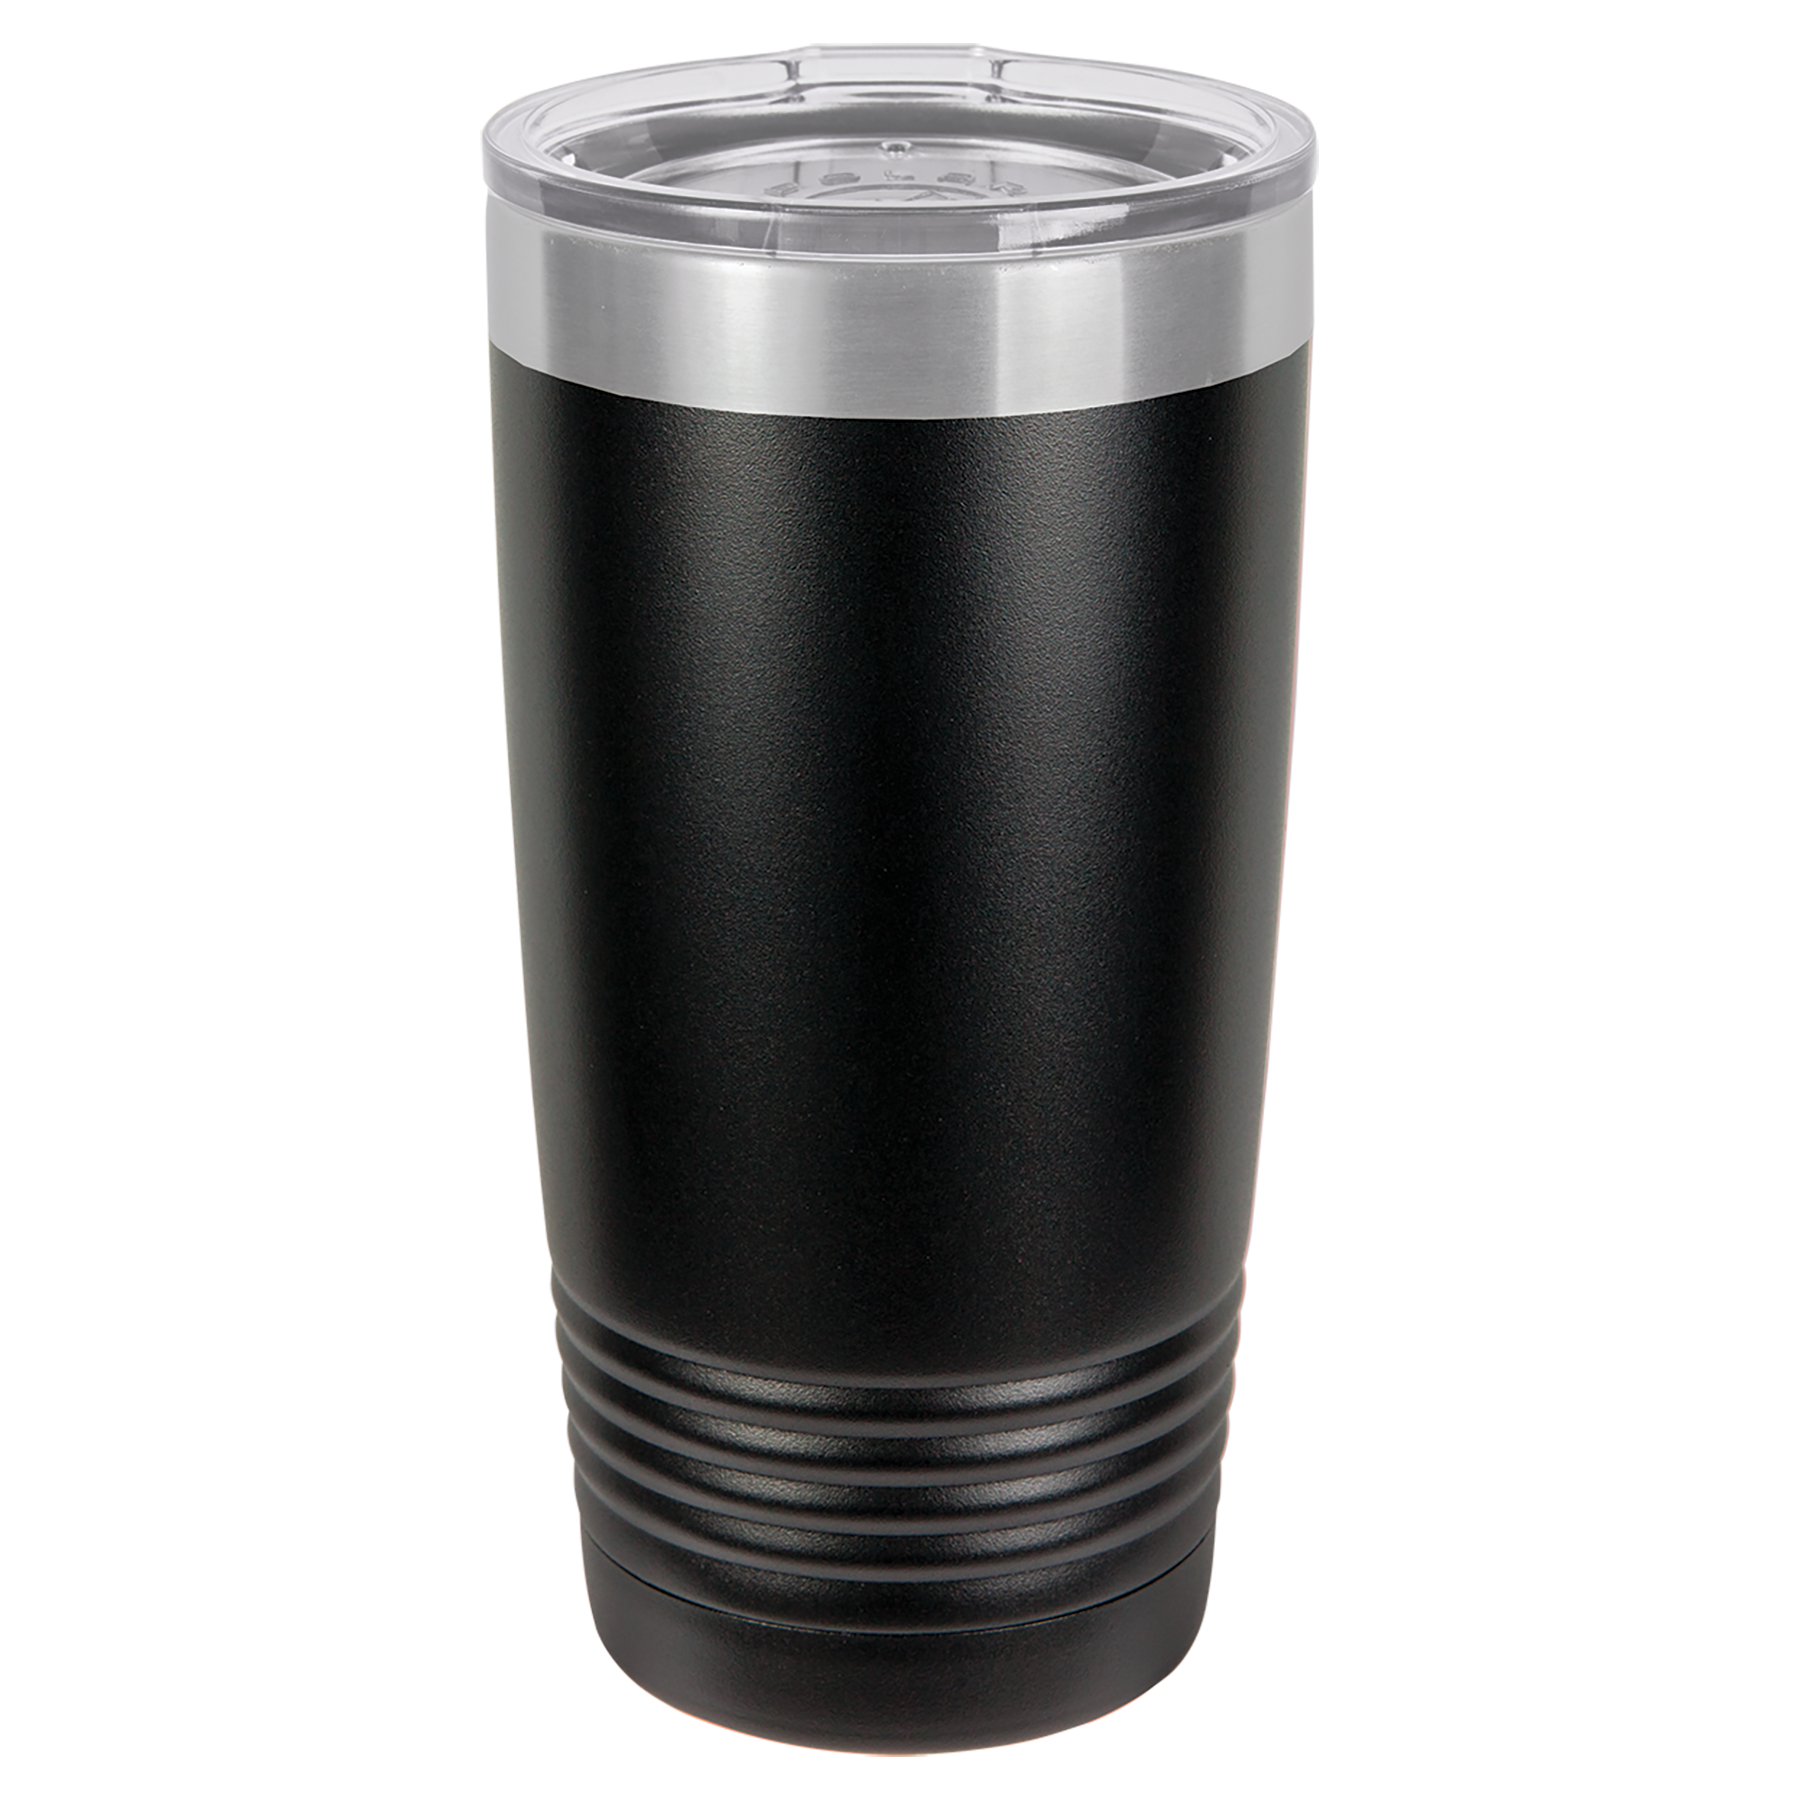 Engraved Black 20oz Tumbler. double-wall vacuum insulation with slider lid 18/8 gauge stainless steel (18% chromium/8% nickel) - also known as Type 304 Food Grade. Dishwasher Safe. Personalize with your name or a custom saying. Great for Company Logo and Branding. Excellent choice for Photo Memorial Cup